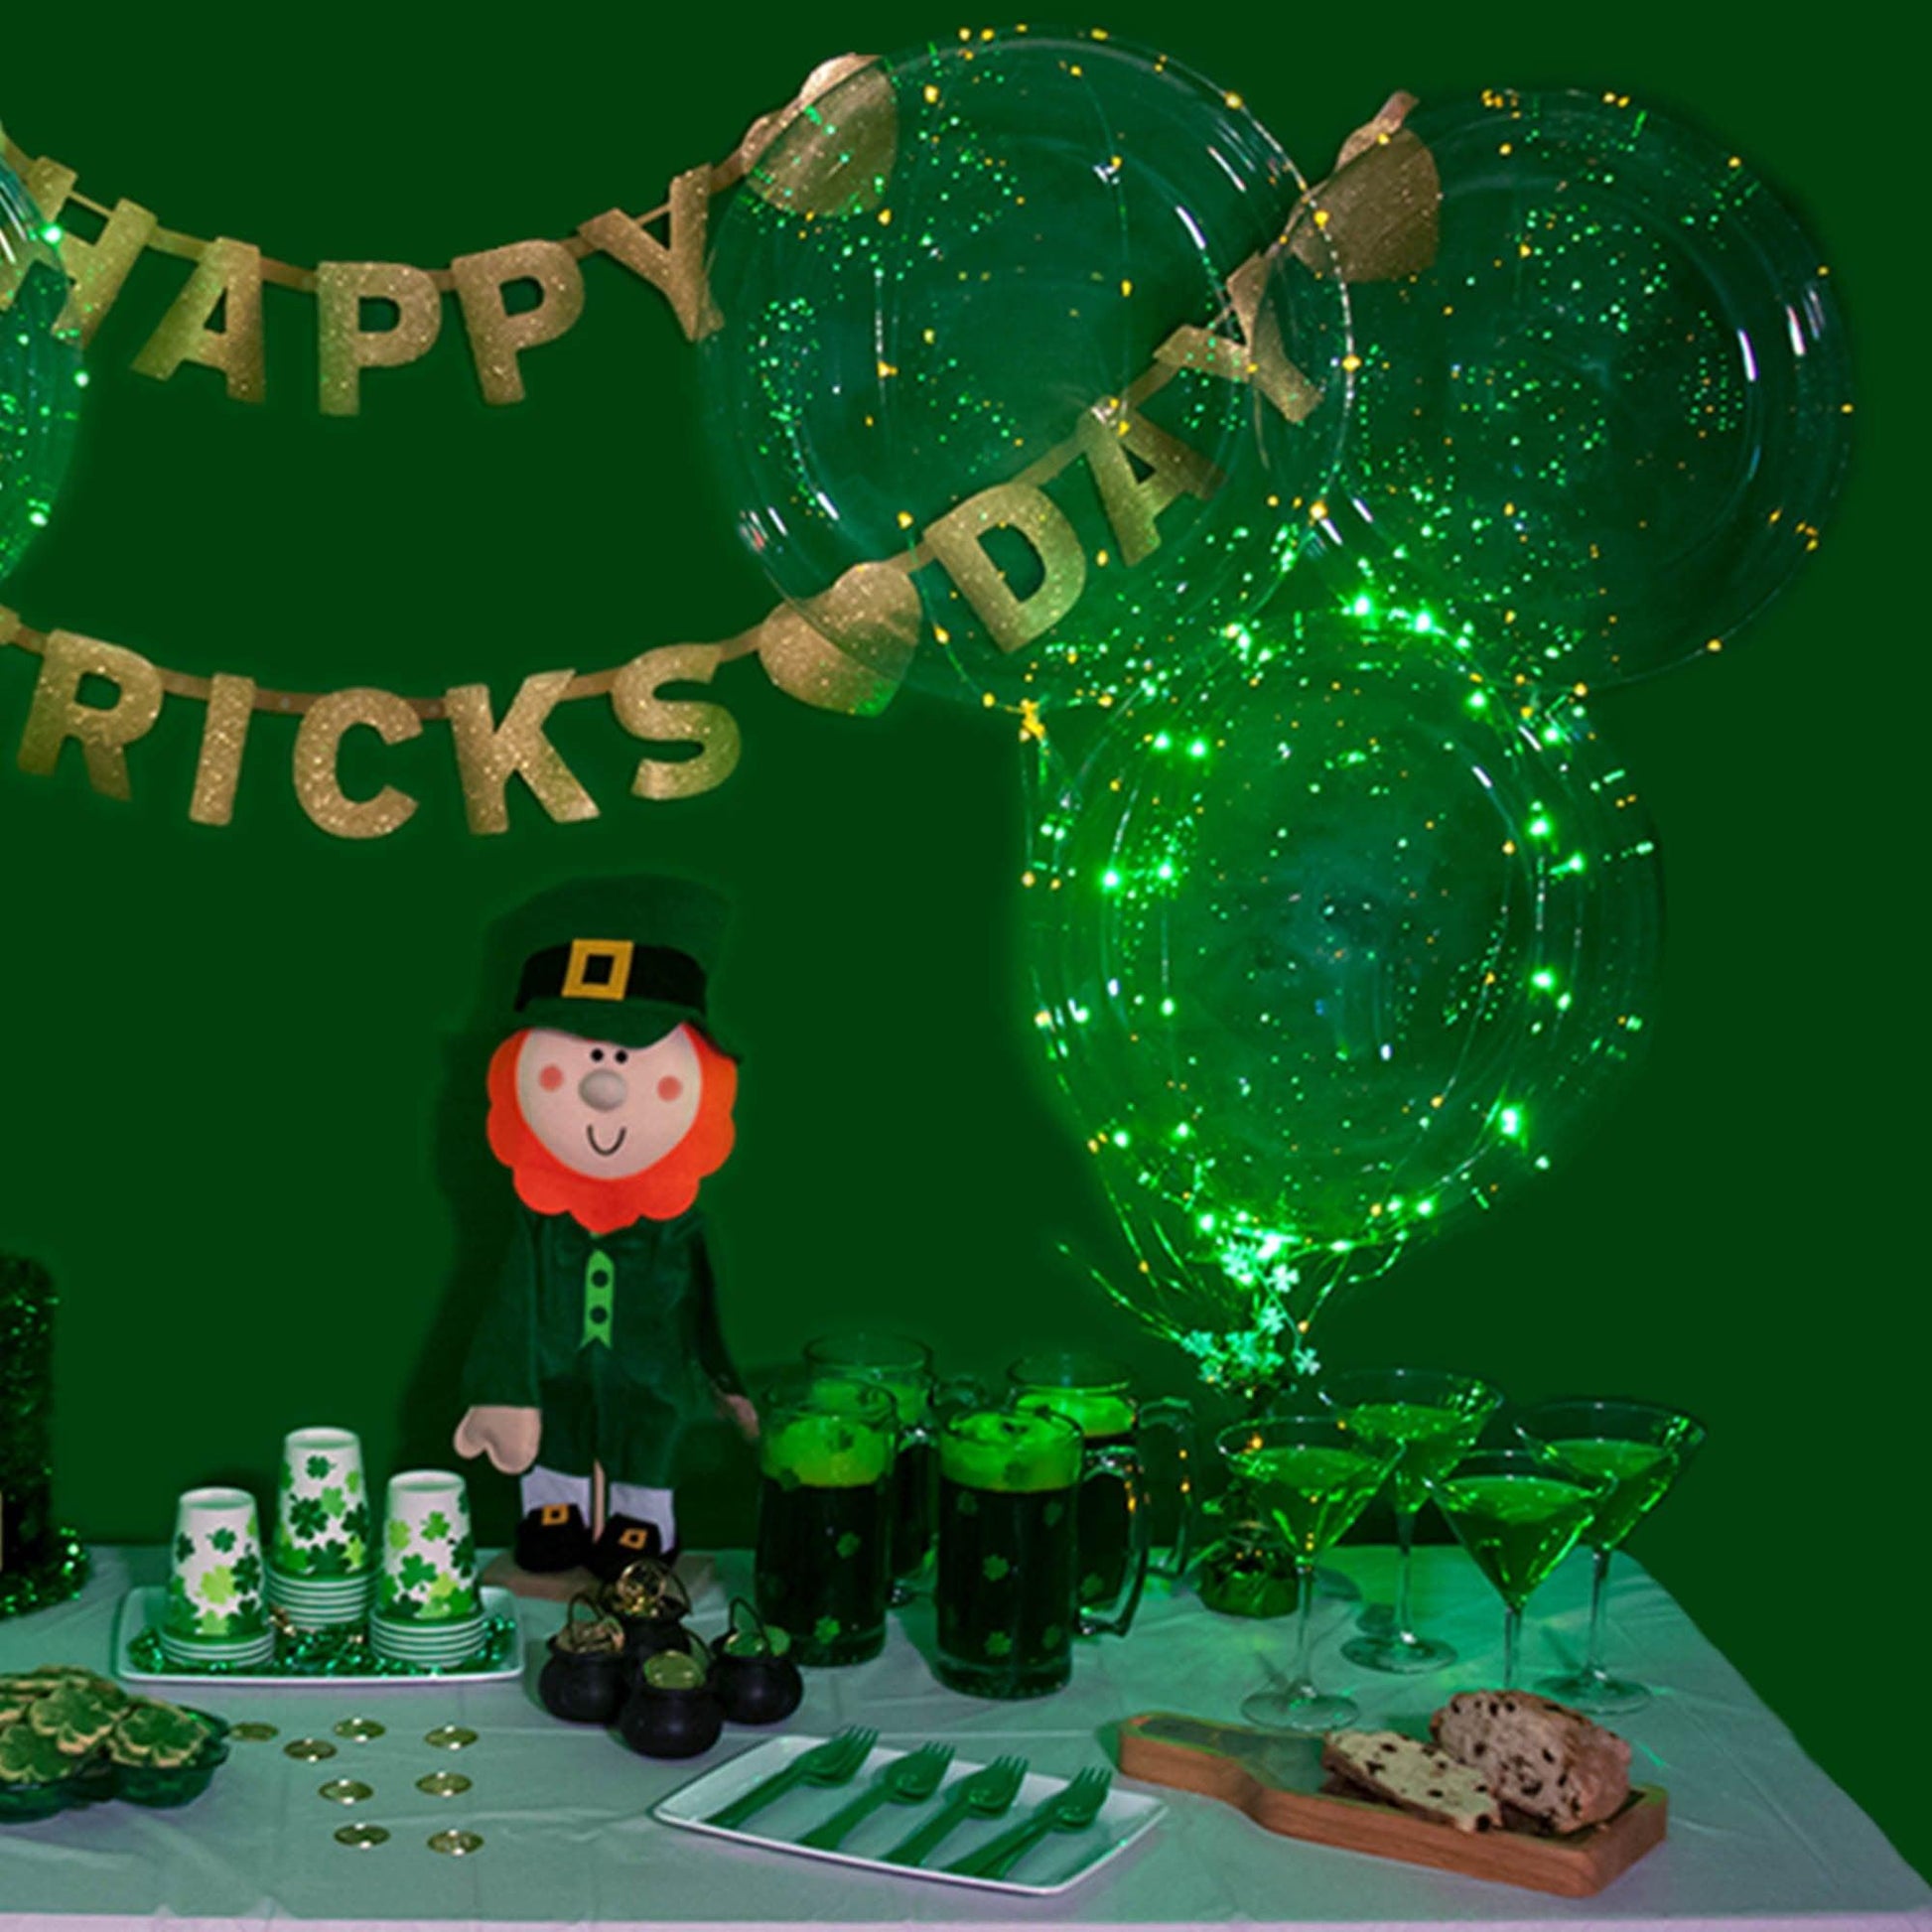 Happy St. Partick's Day with Green Led Balloon Decorations - If you say i do